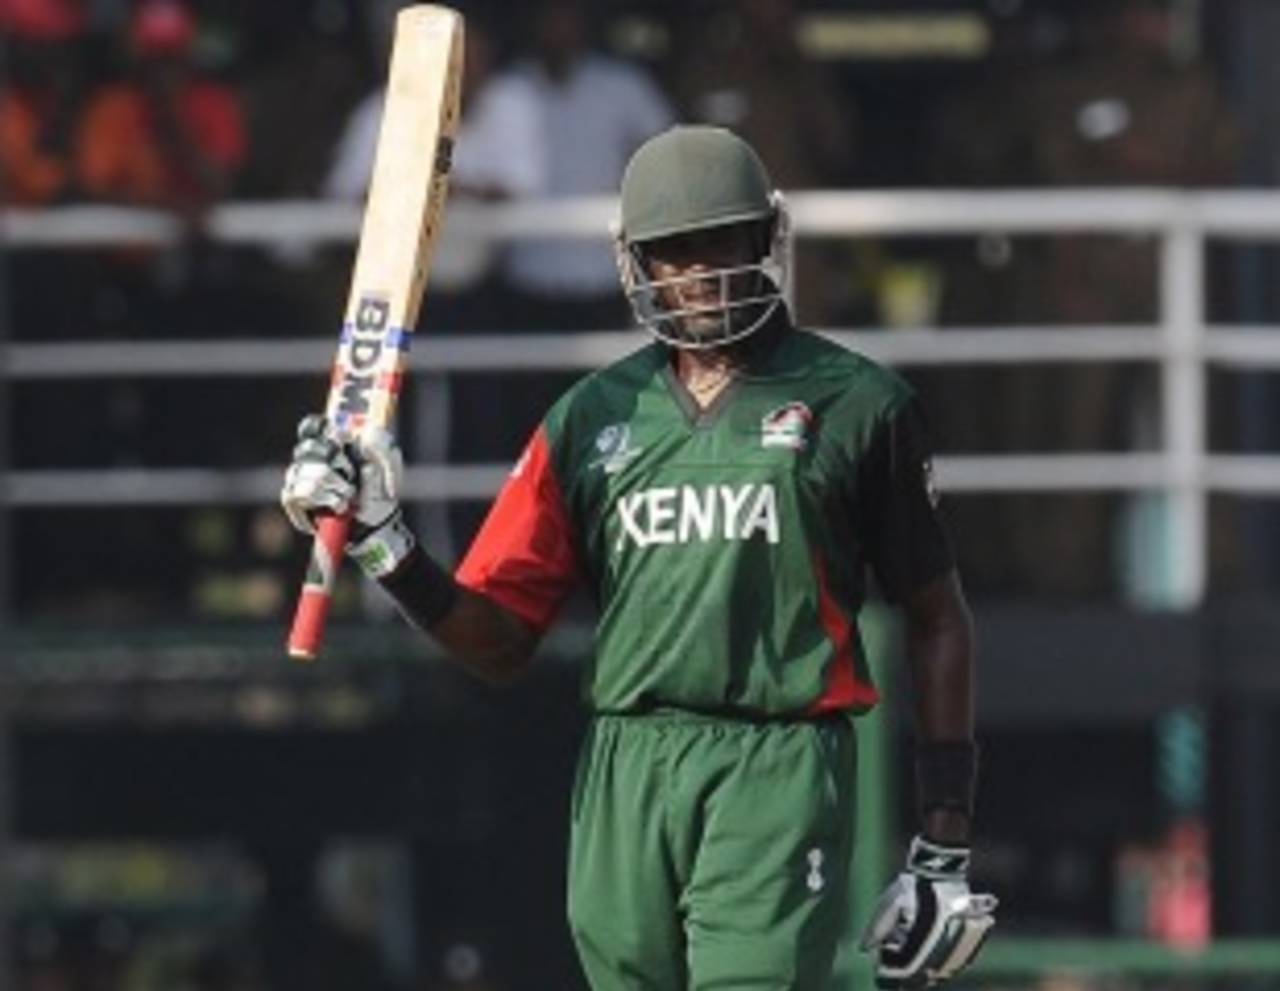 Despite the ban, Collins Obuya is likely to be available to lead Kenya in their first match of the World Twenty20 qualifiers&nbsp;&nbsp;&bull;&nbsp;&nbsp;AFP